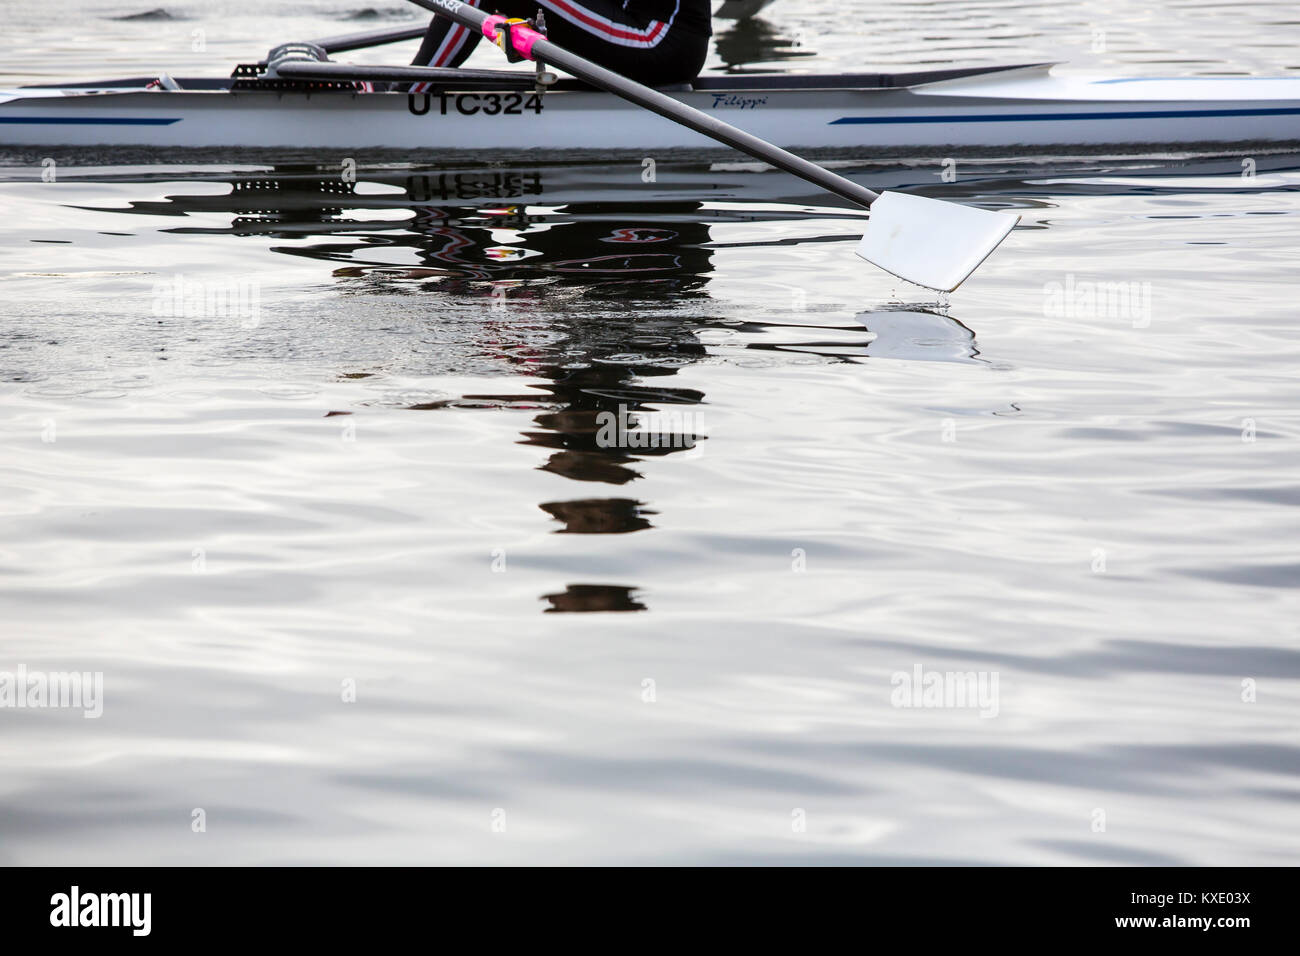 A single rower on a river skulling through the gently rippling water. Stock Photo